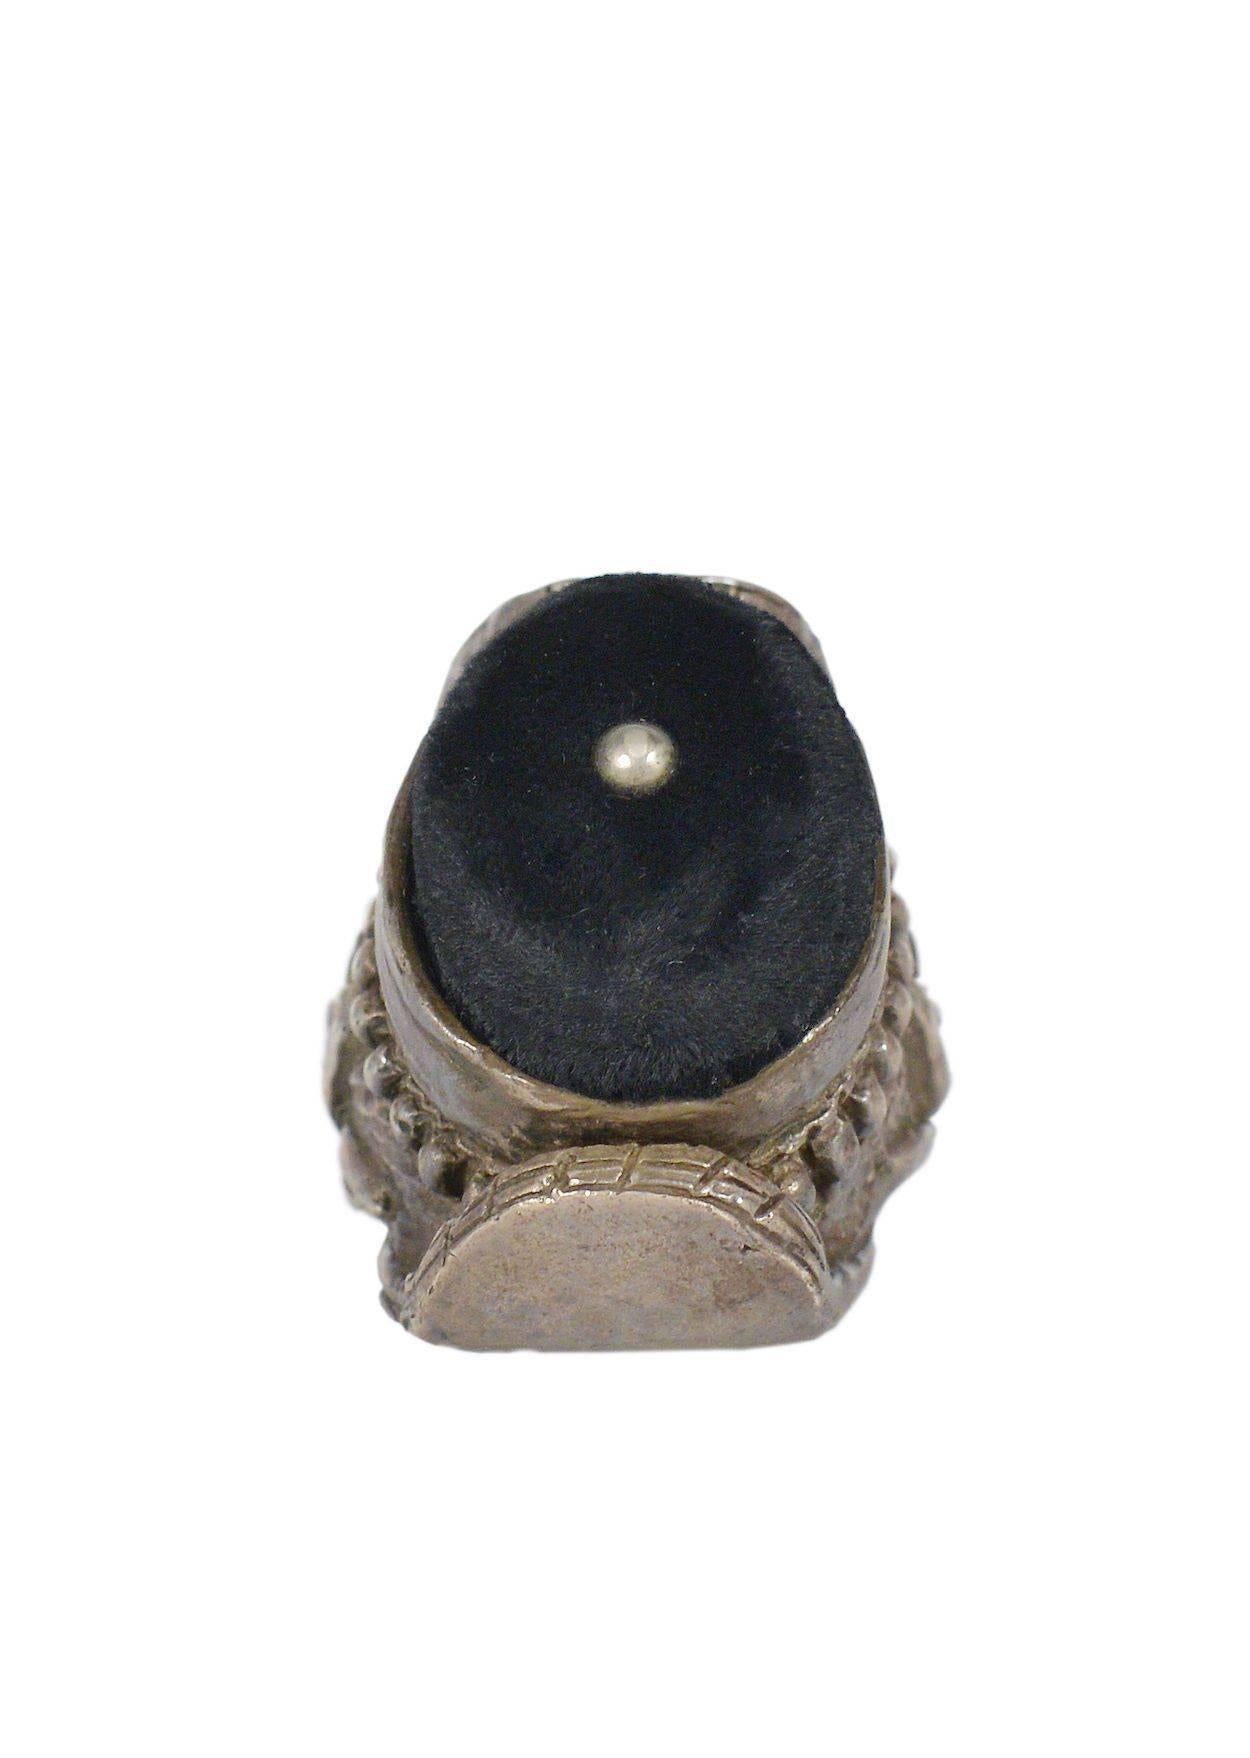 Tom Ford for Yves Saint Laurent oversized cast metal ring with black velvet cushion cabochon and silver tone bead at center. Massive ring features chunky detailing and engraving. Featured on the runway and in advertising AW 2002. 